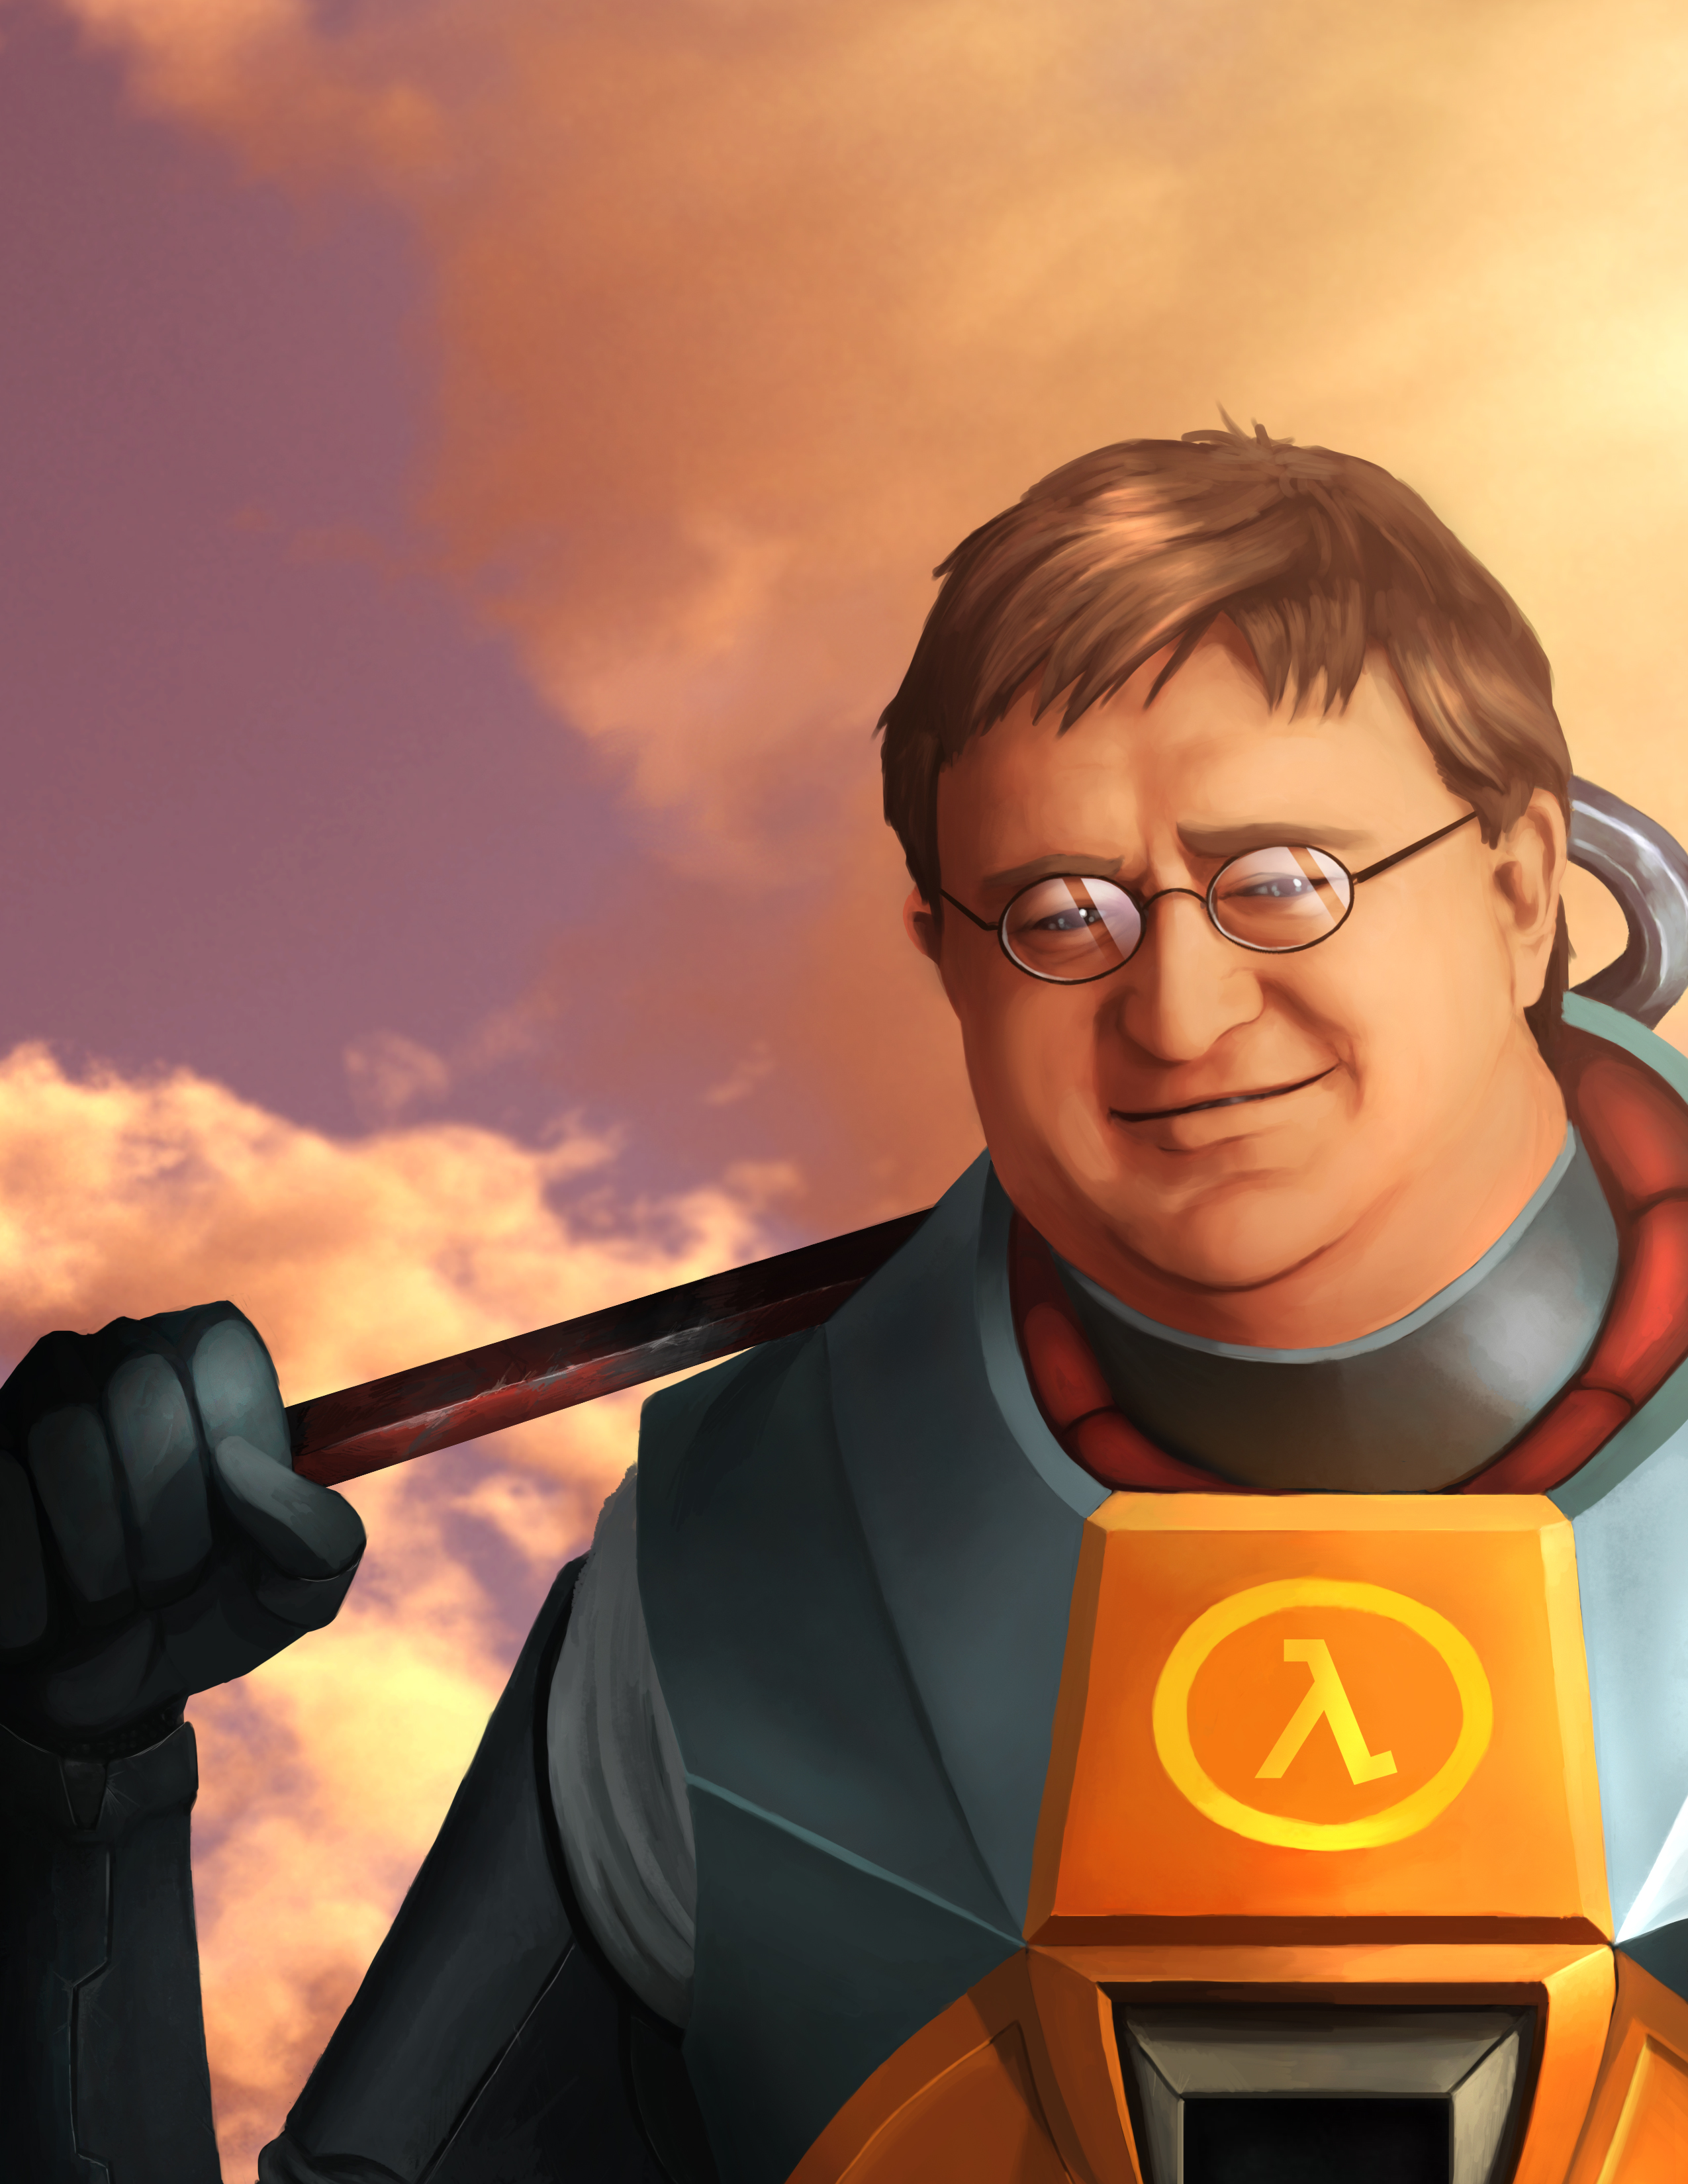 Gabe Newell Iphone Wallpaper by EarlyRise on DeviantArt